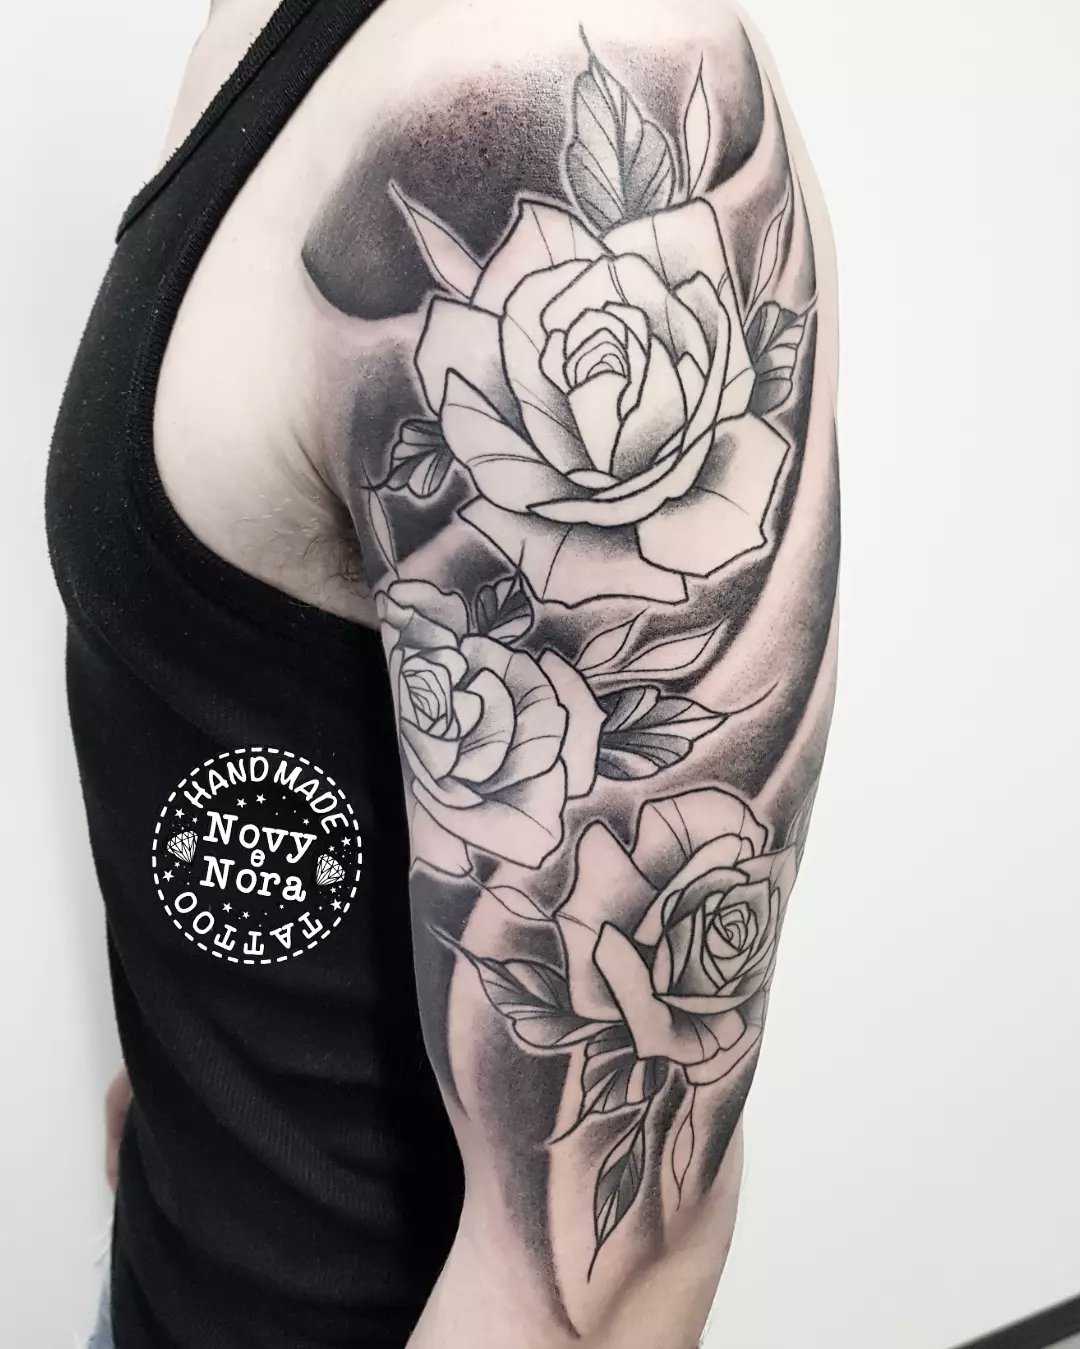 Roses with negative outlined Cross tattoo tattoos roses rosetattoo  crosstattoo blackandgreytattoo blackandgreyink realismtattoo   Instagram